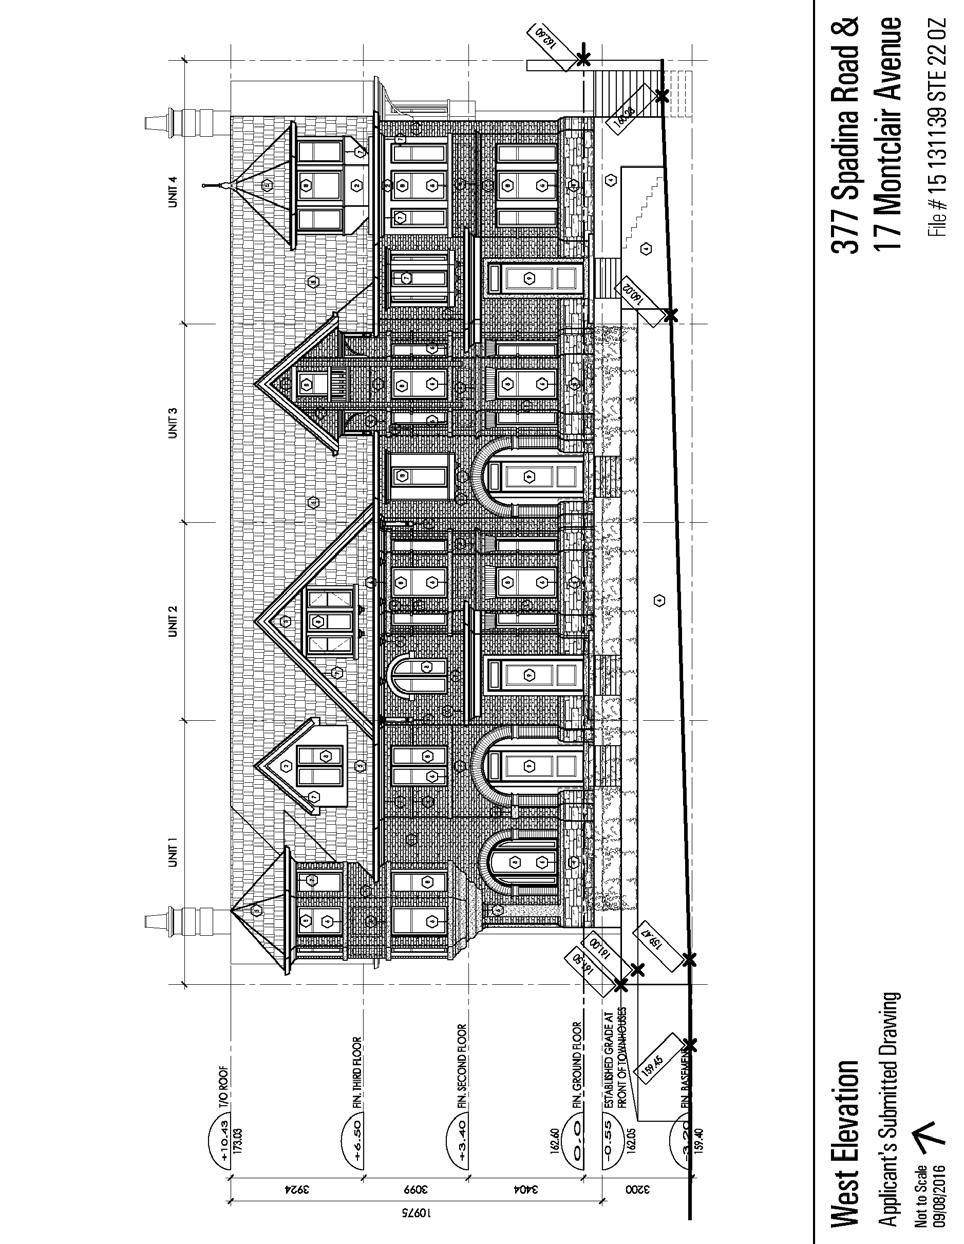 Attachment 2: West Elevation (Townhouses) Staff